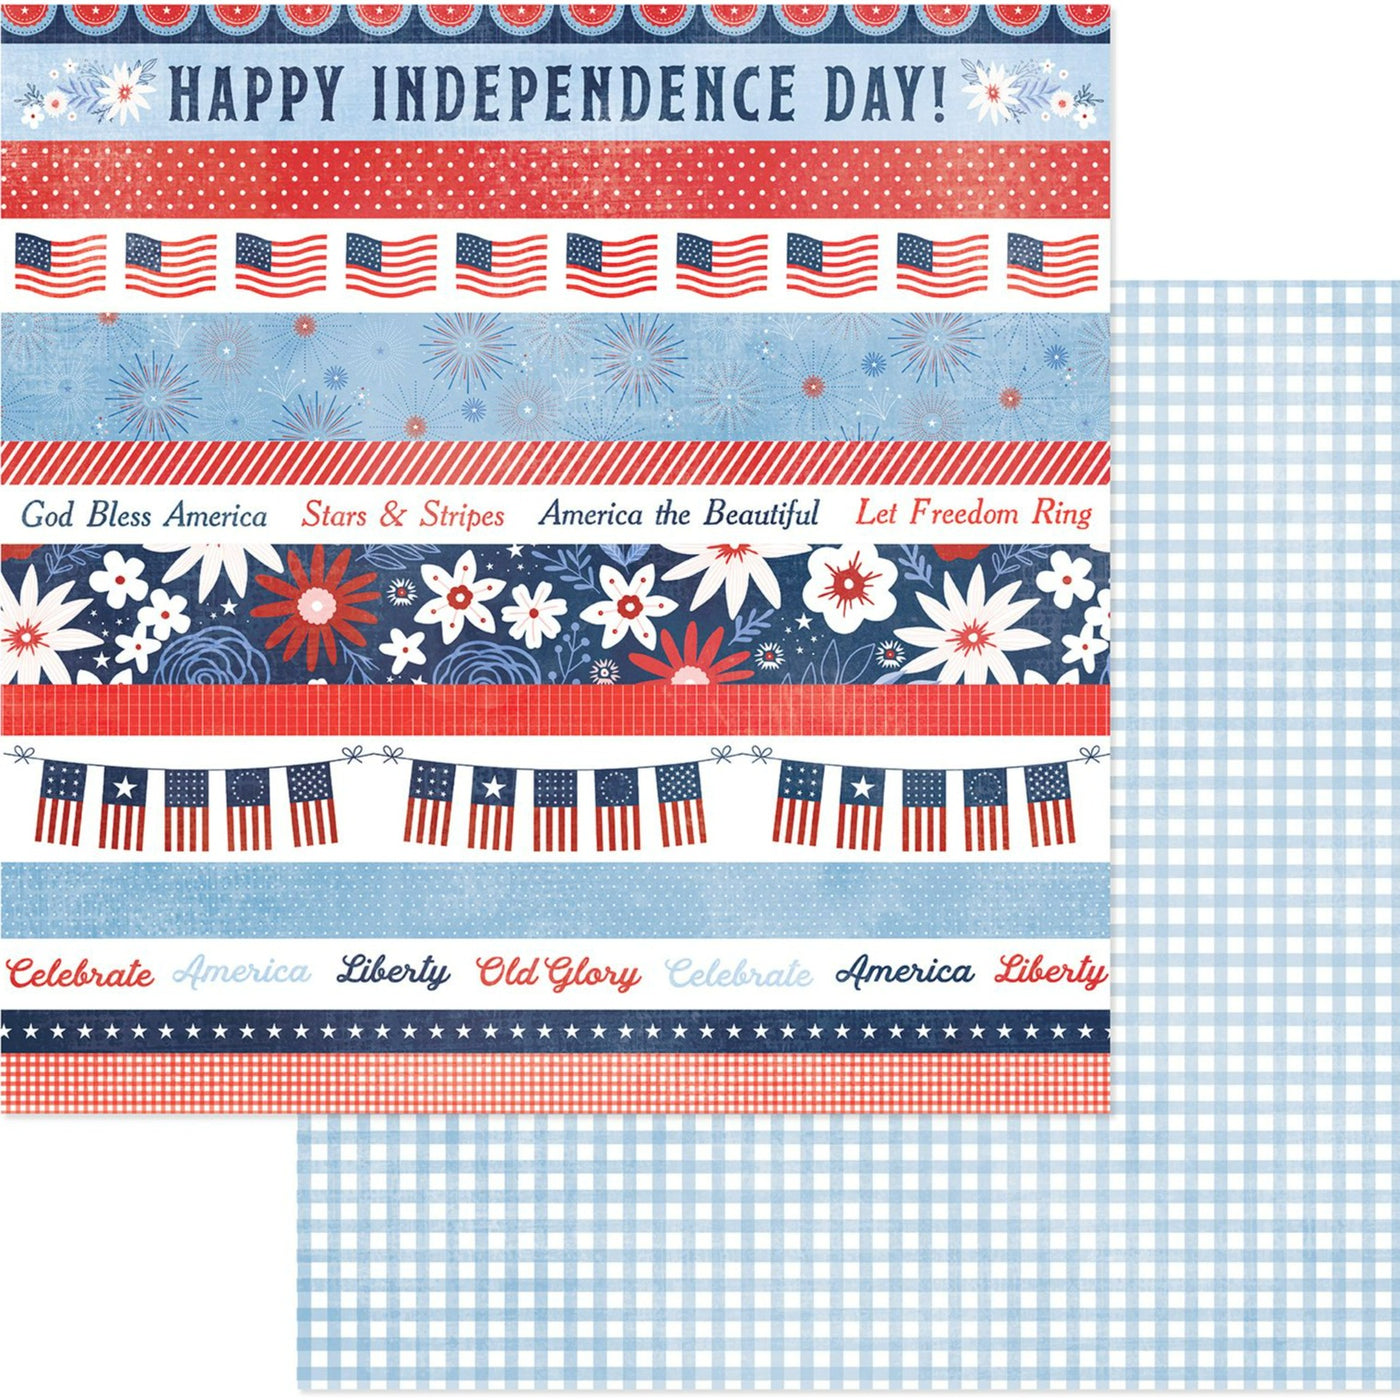 12x12 double-sided patterned paper. (Side A - Independence Day banners, Side B - blue gingham background) - American Crafts